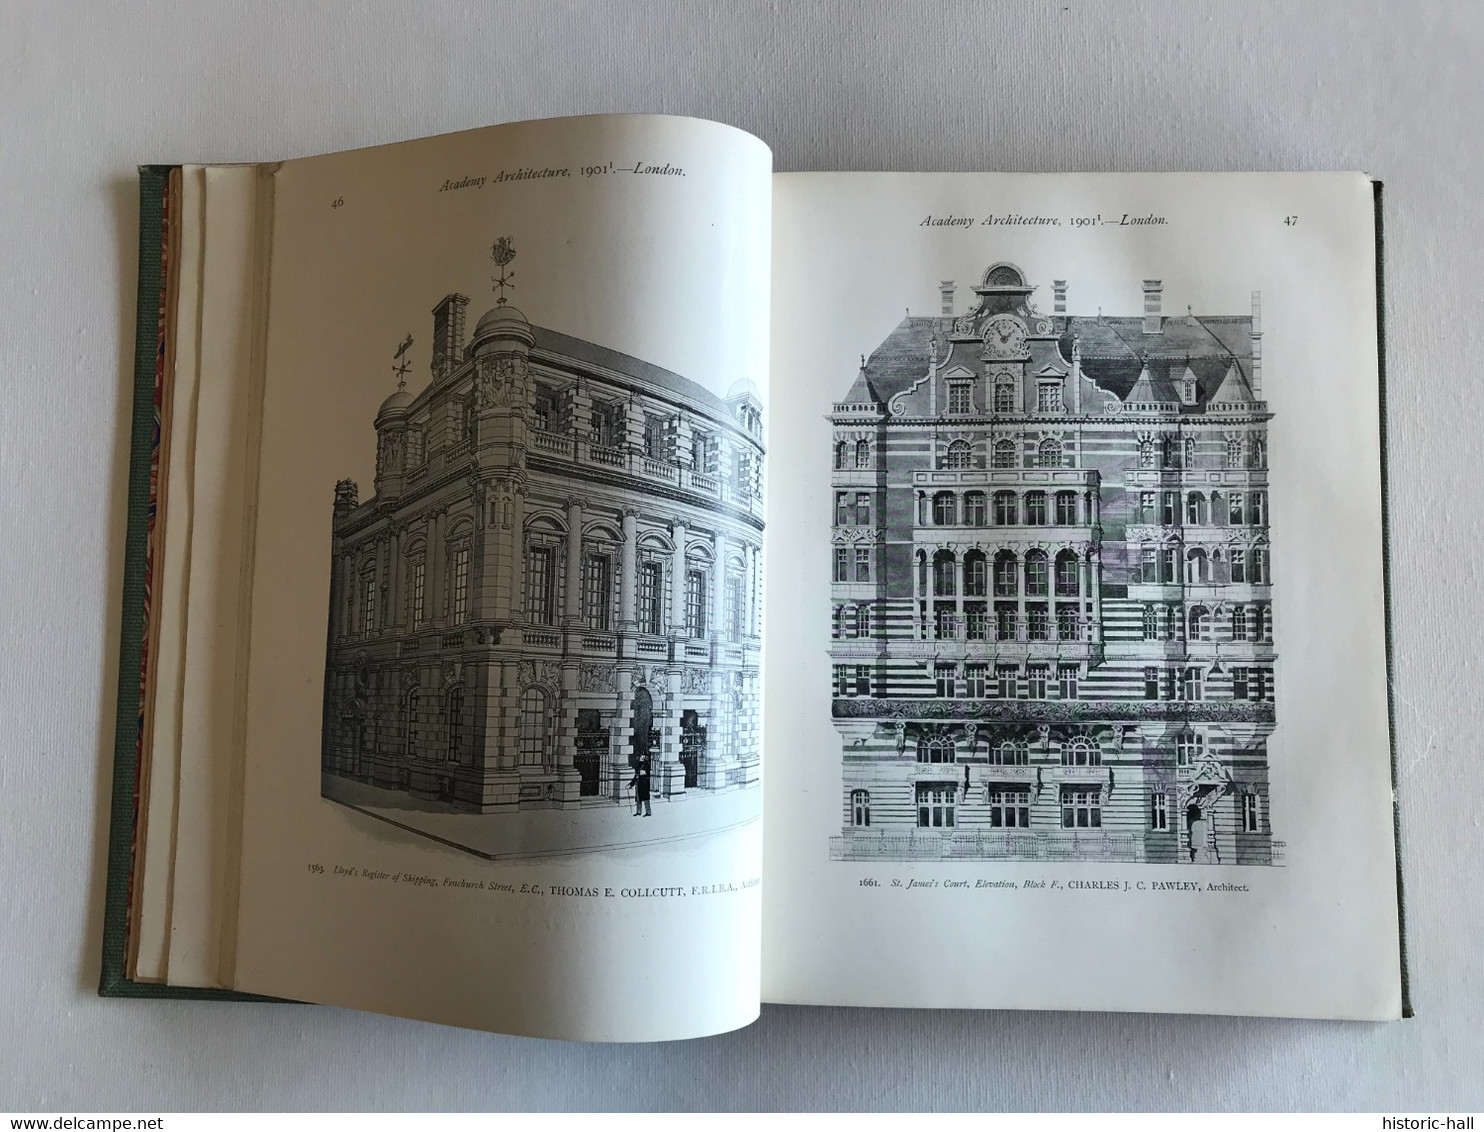 ACADEMY ARCHITECTURE & Architectural Review - Vol I & II - 1901 - Alexander KOCH - Architecture